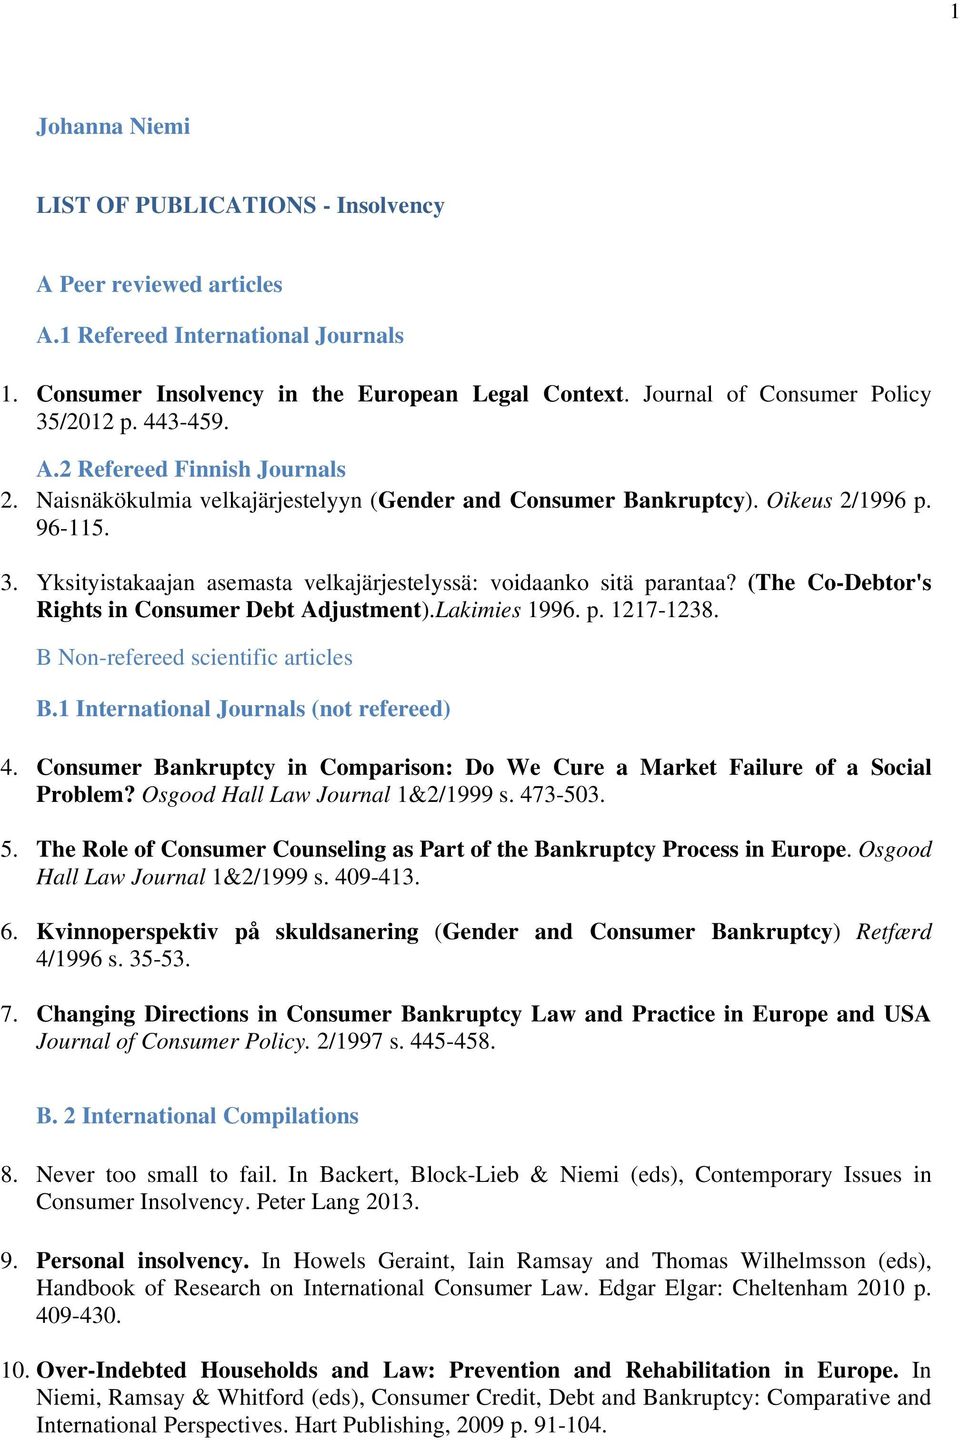 (The Co-Debtor's Rights in Consumer Debt Adjustment).Lakimies 1996. p. 1217-1238. B Non-refereed scientific articles B.1 International Journals (not refereed) 4.